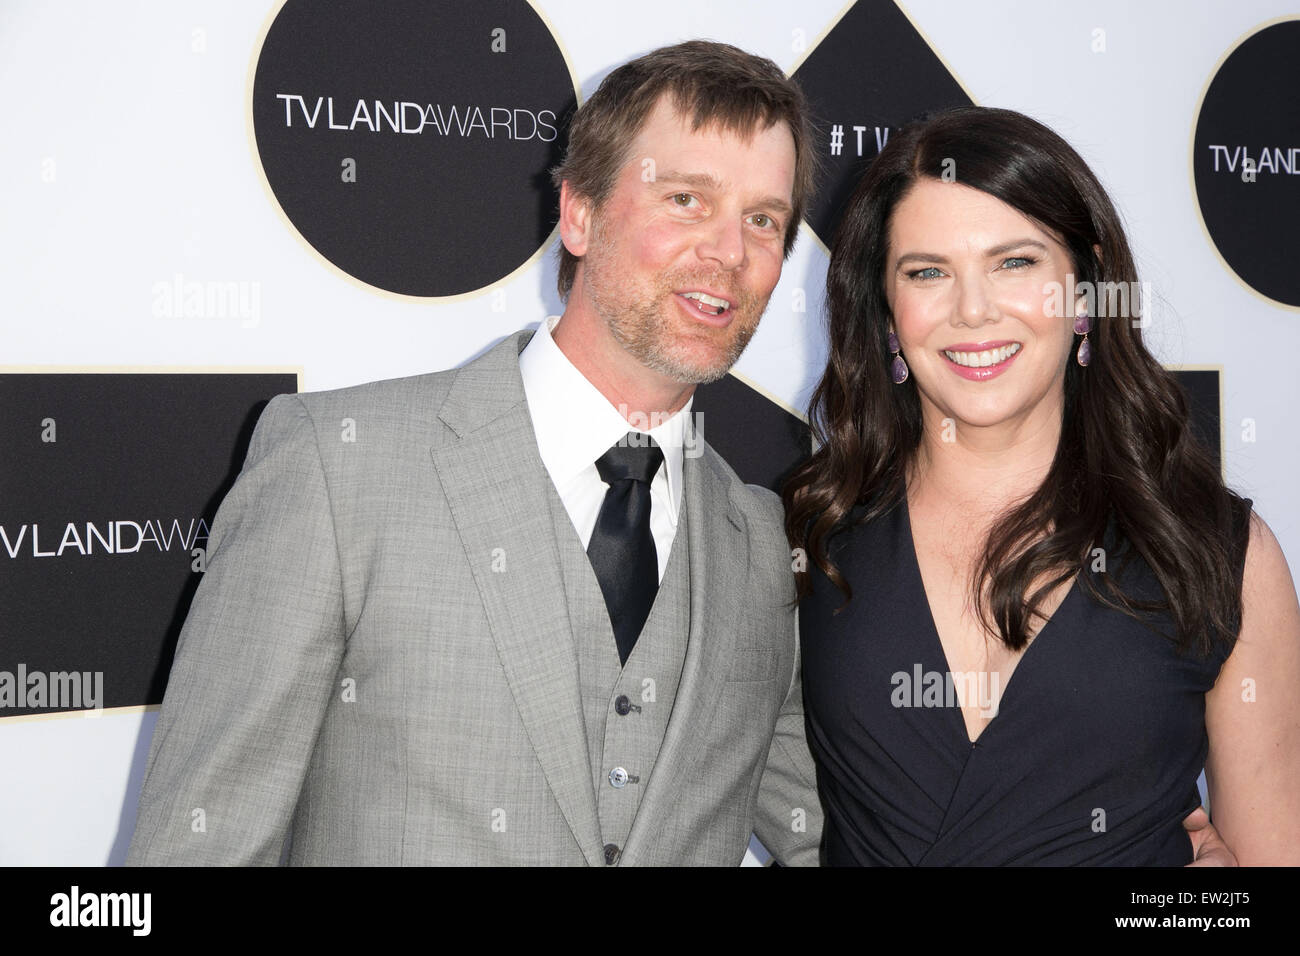 Celebrities attend 2015 TV LAND Awards at The Saban Theatre.  Featuring: Peter Krause, Lauren Graham Where: Los Angeles, California, United States When: 11 Apr 2015 C Stock Photo